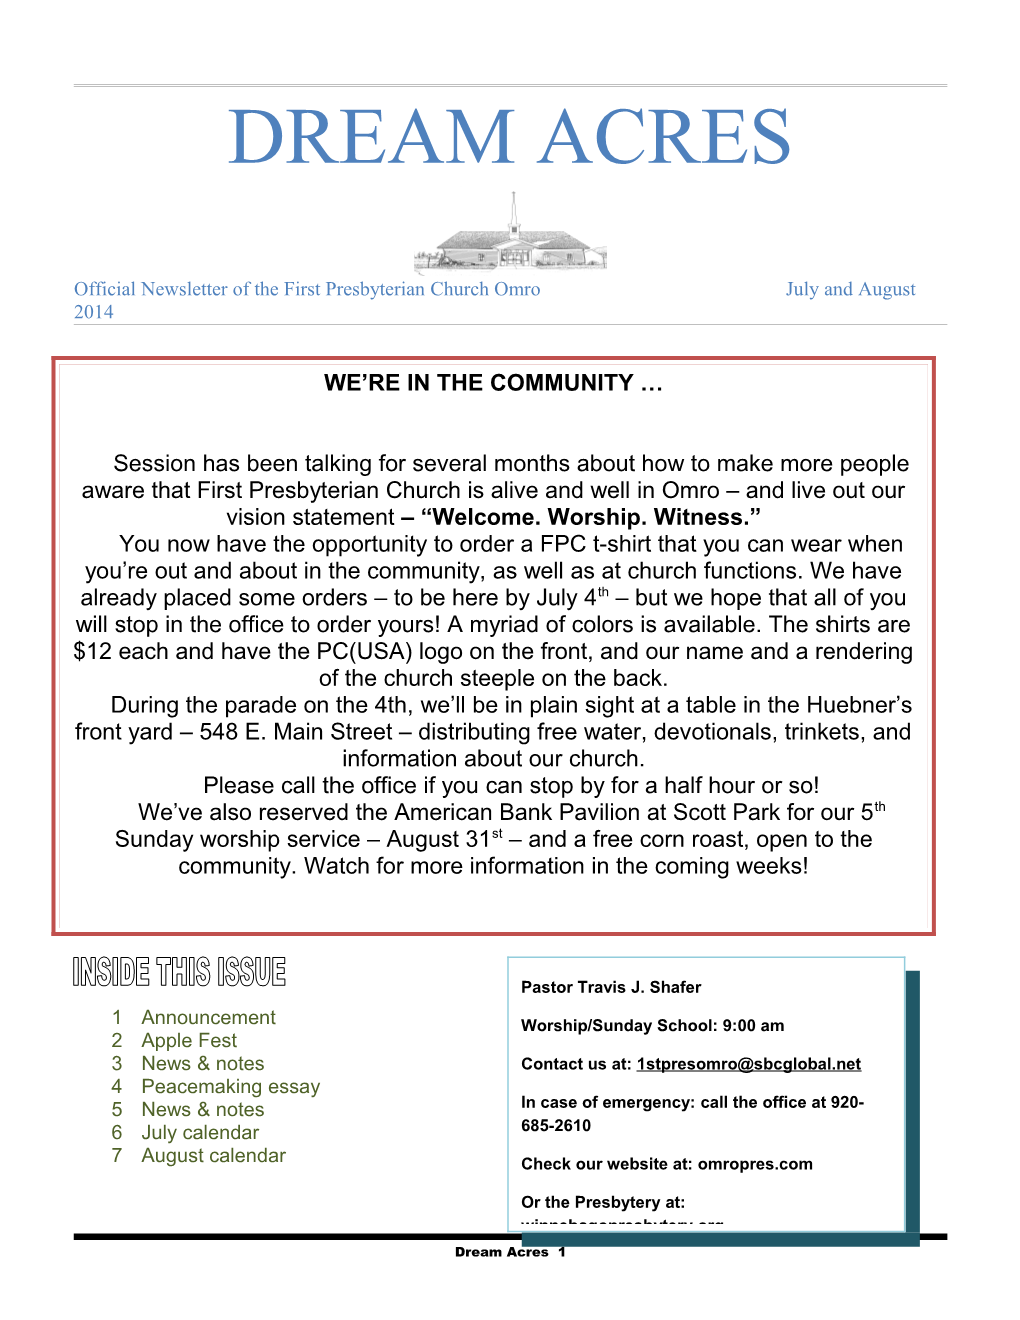 Official Newsletter of the First Presbyterian Church Omro July and August 2014